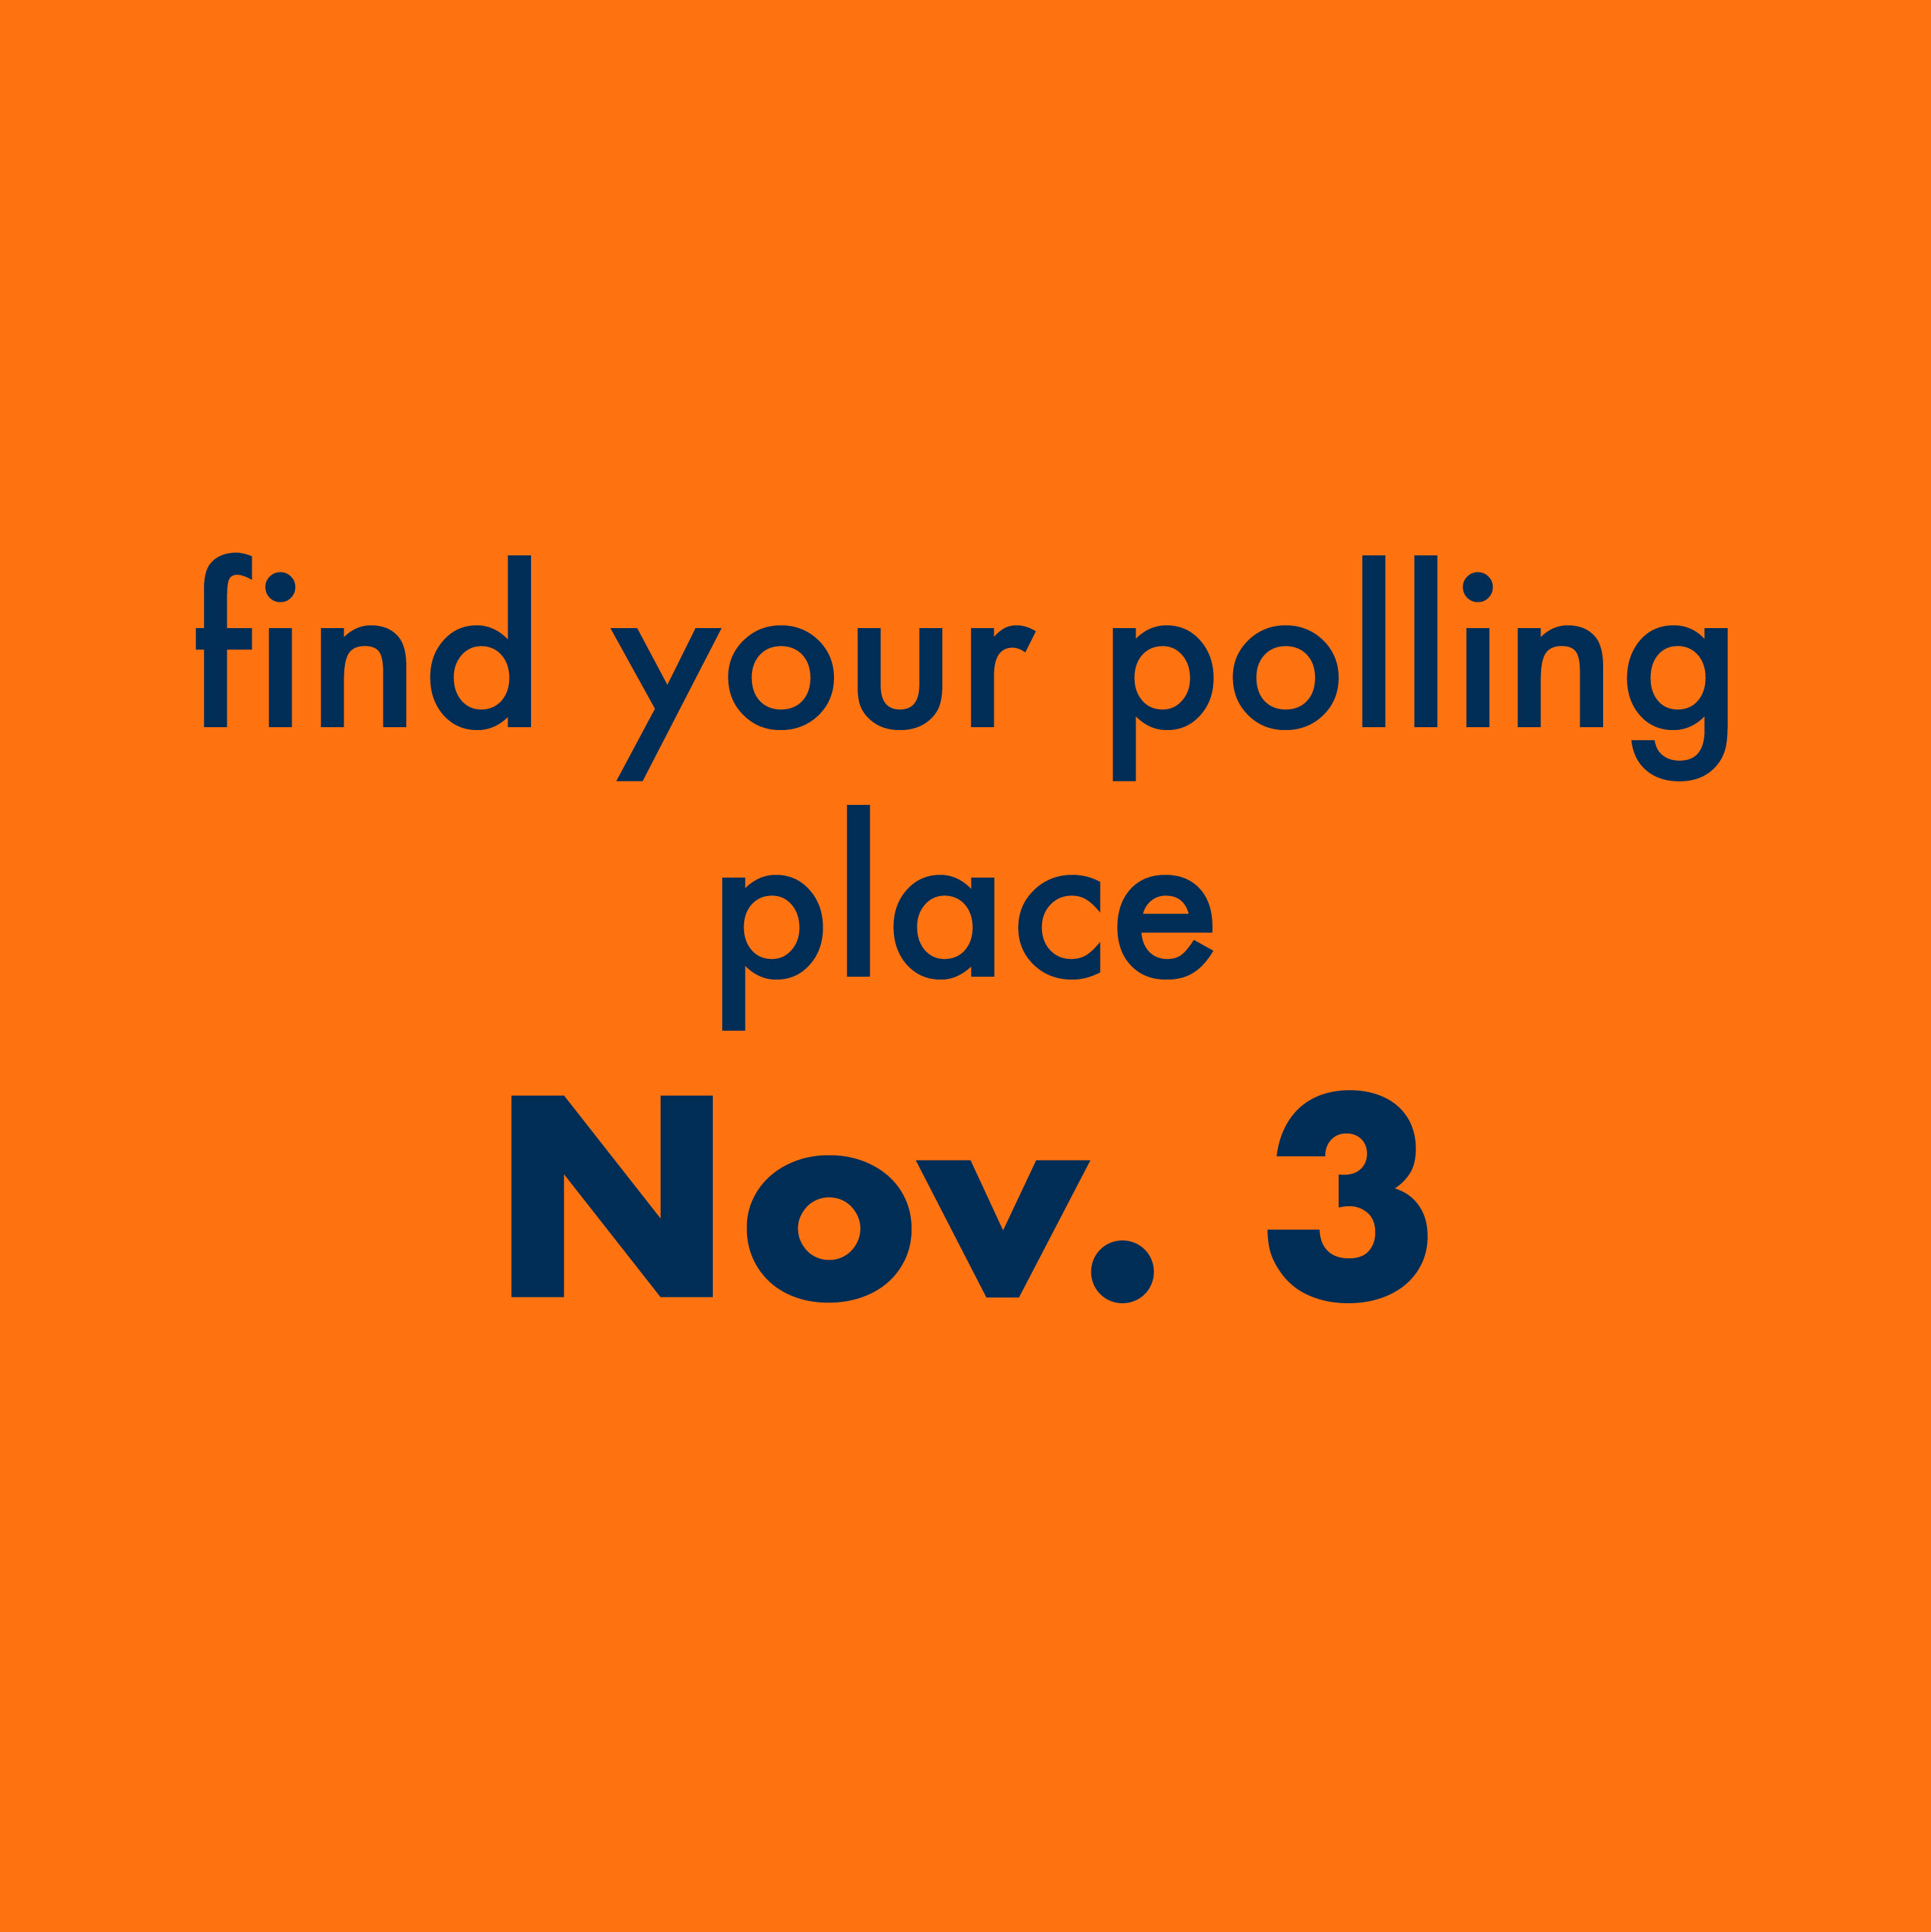 Find your polling place Nov. 3